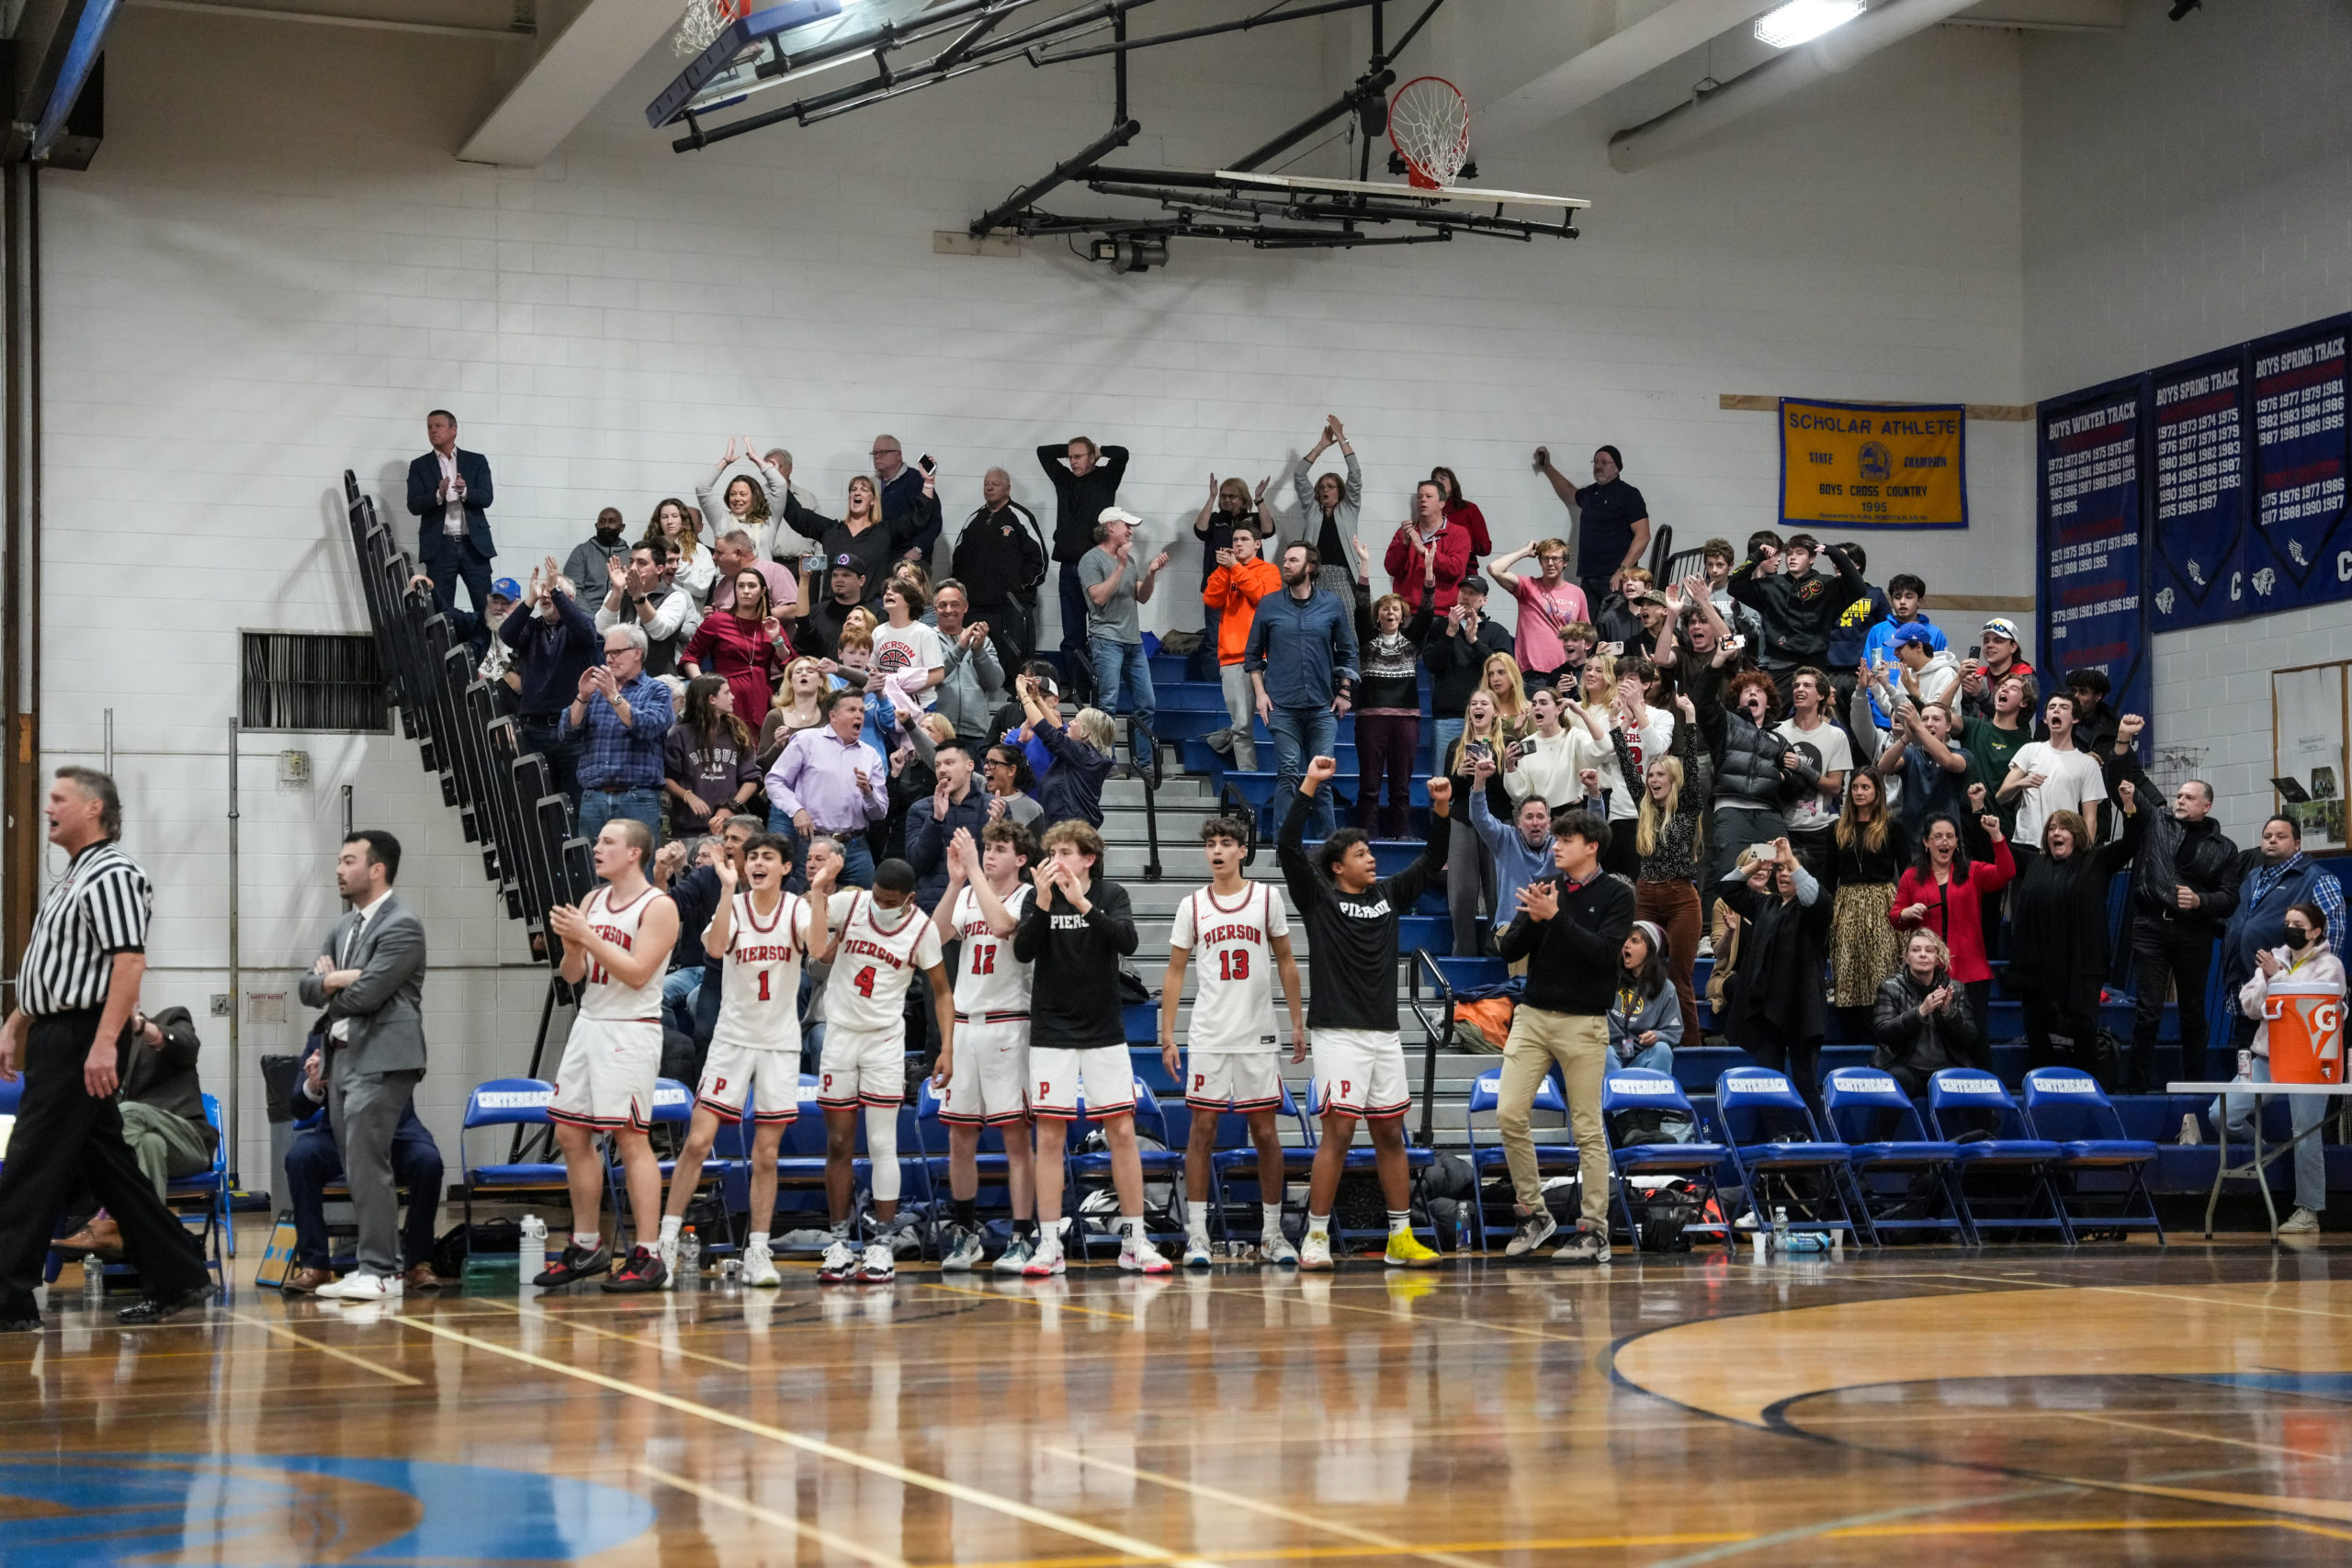 Pierson players and the crowd react to the boys basketball team's victory on Wednesday.   RON ESPOSITO